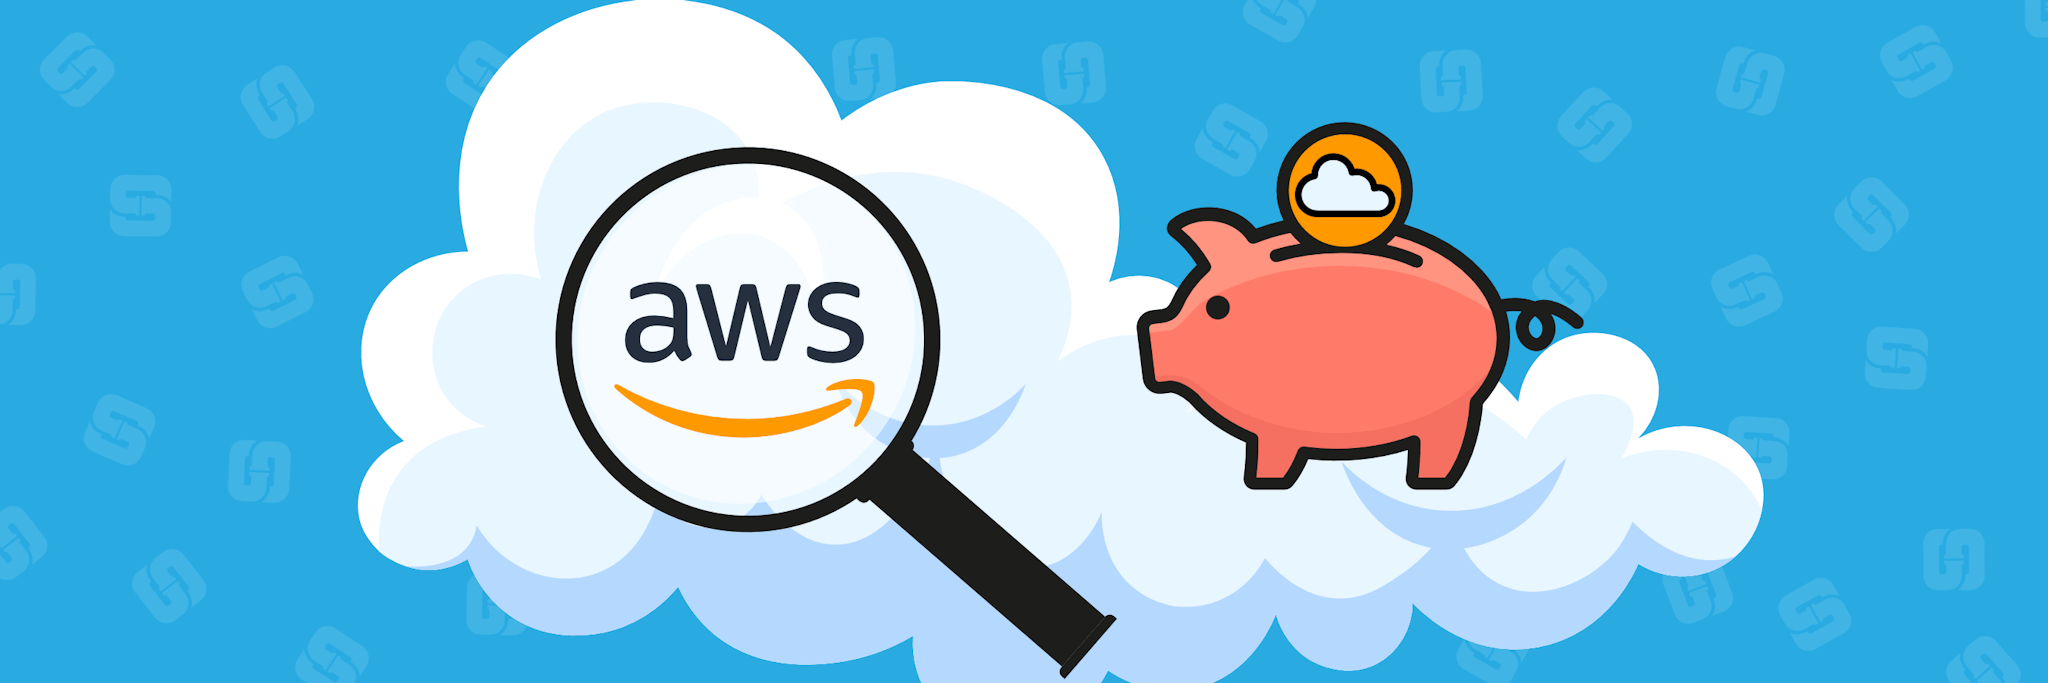 How to save big in AWS by cleaning up your underused resources, stale data, and more.